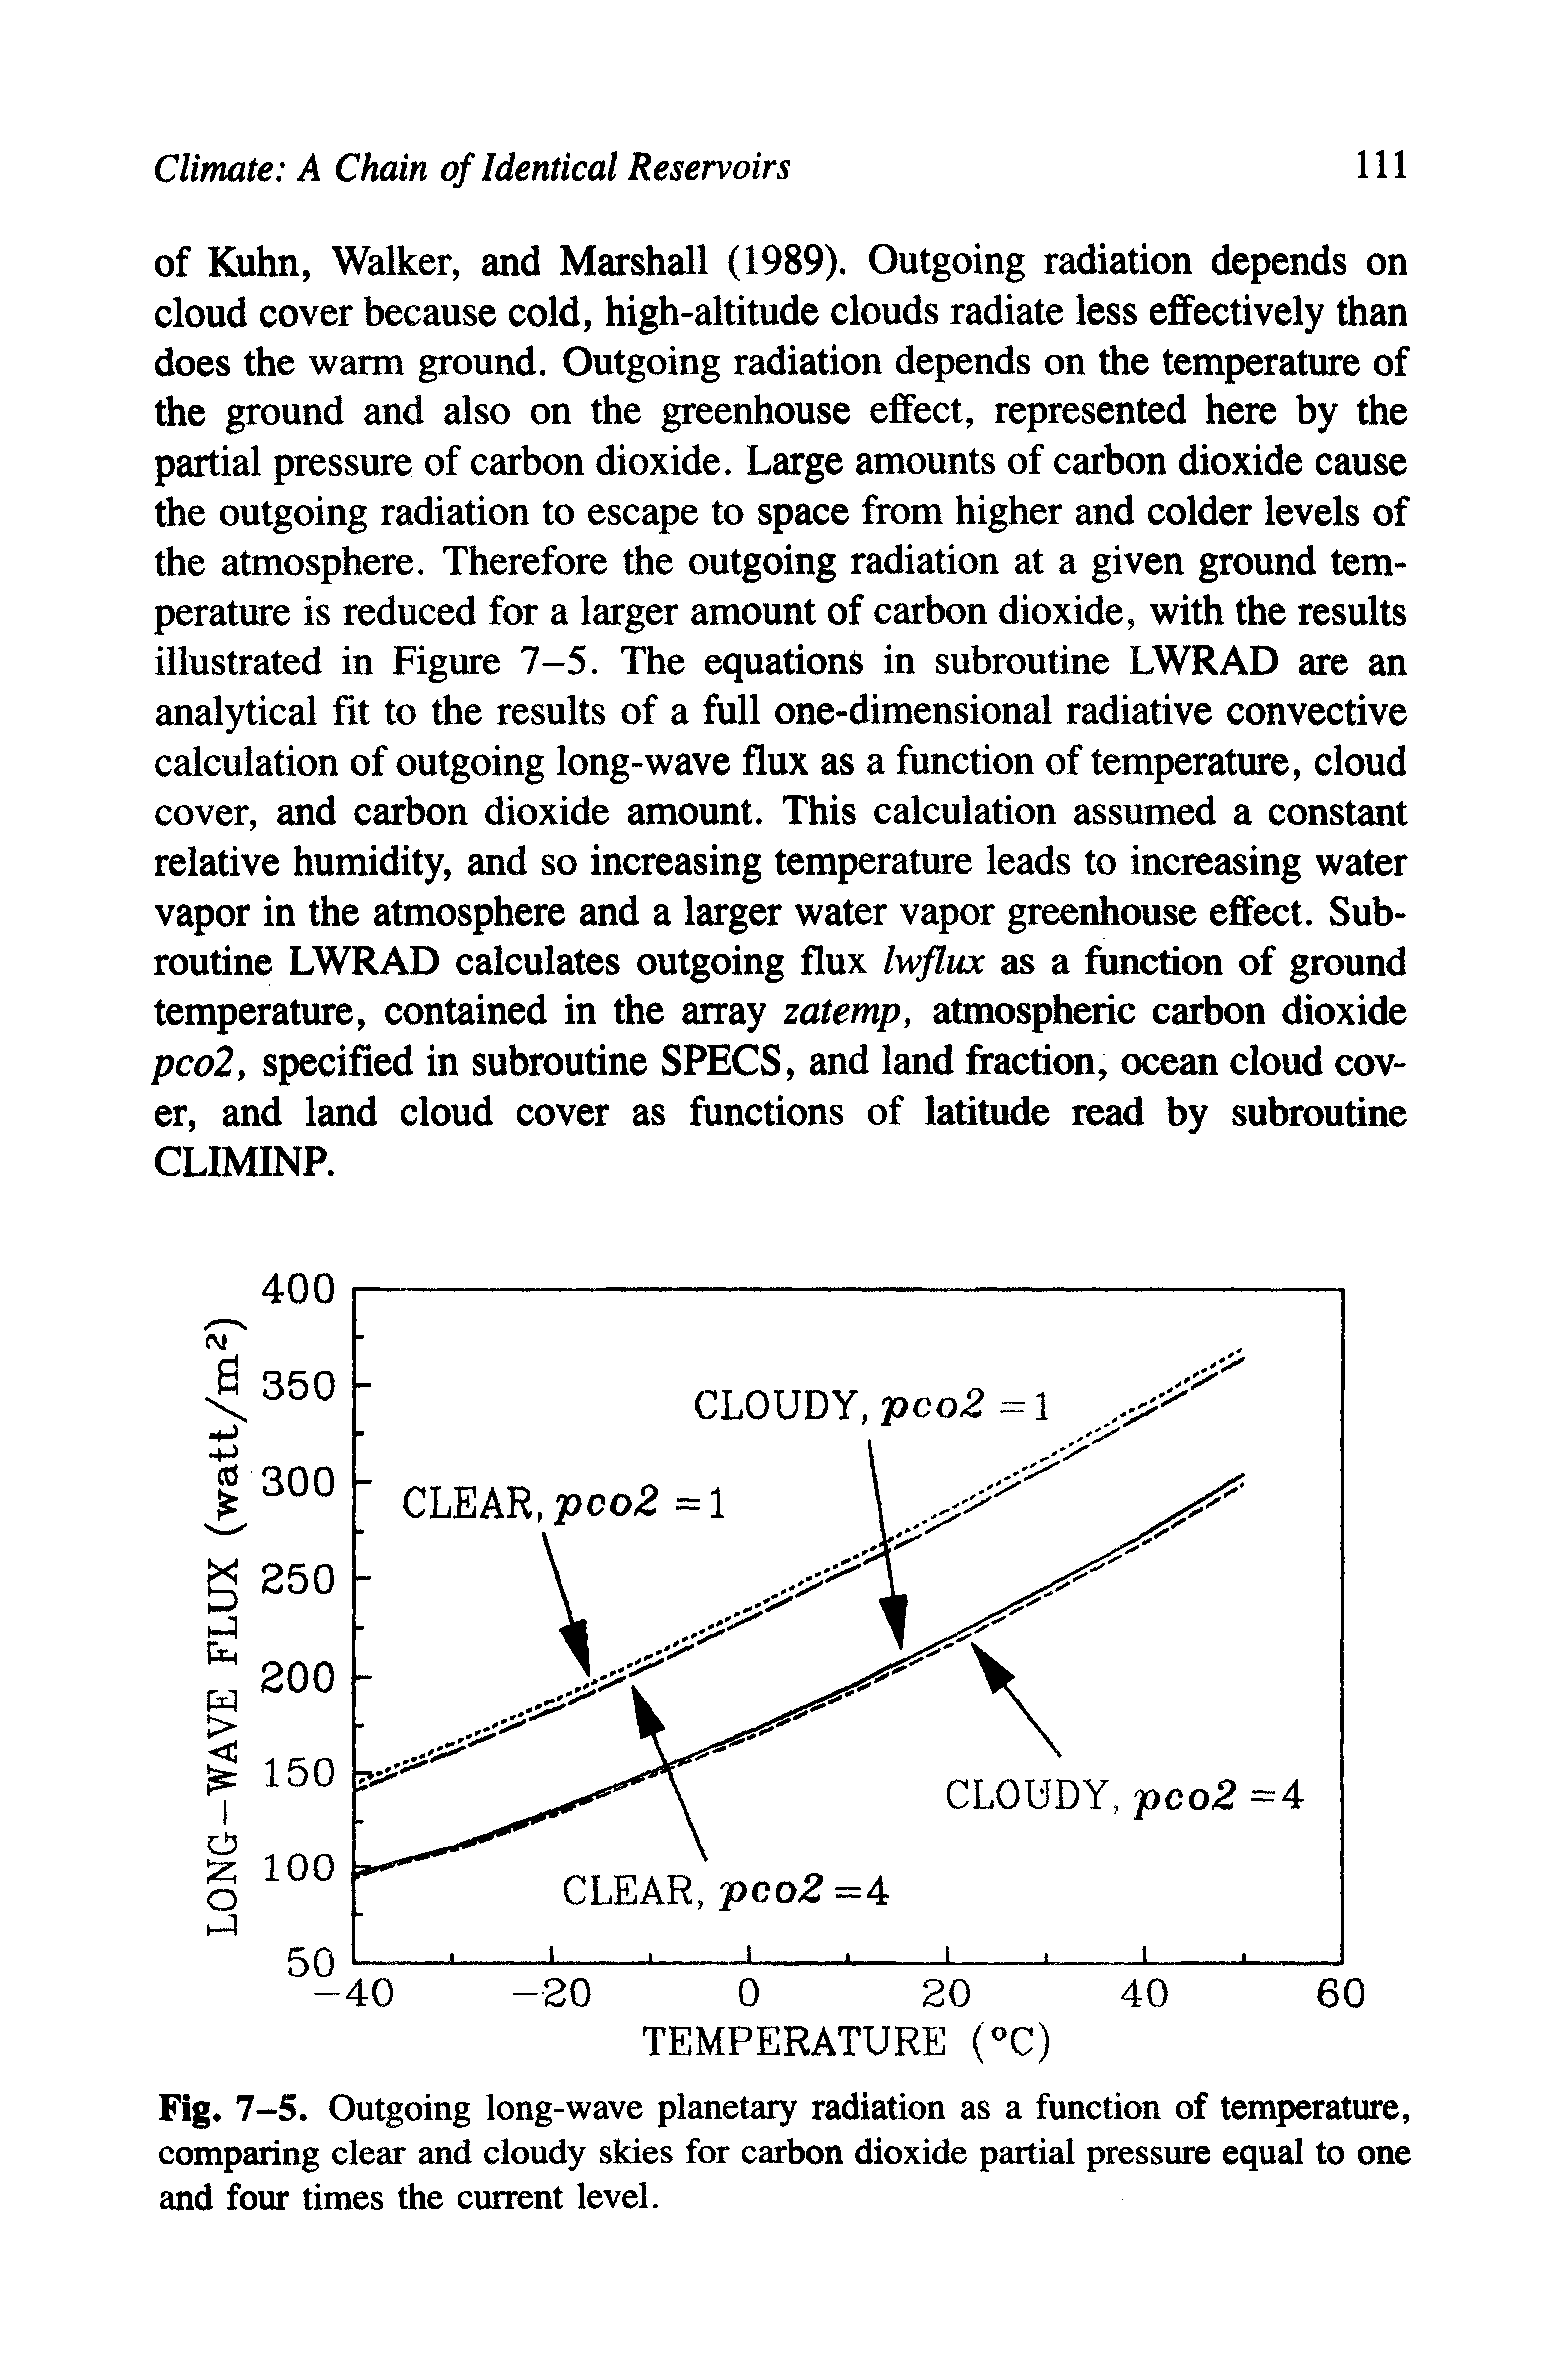 Fig. 7-5. Outgoing long-wave planetary radiation as a function of temperature, comparing clear and cloudy skies for carbon dioxide partial pressure equal to one and four times the current level.